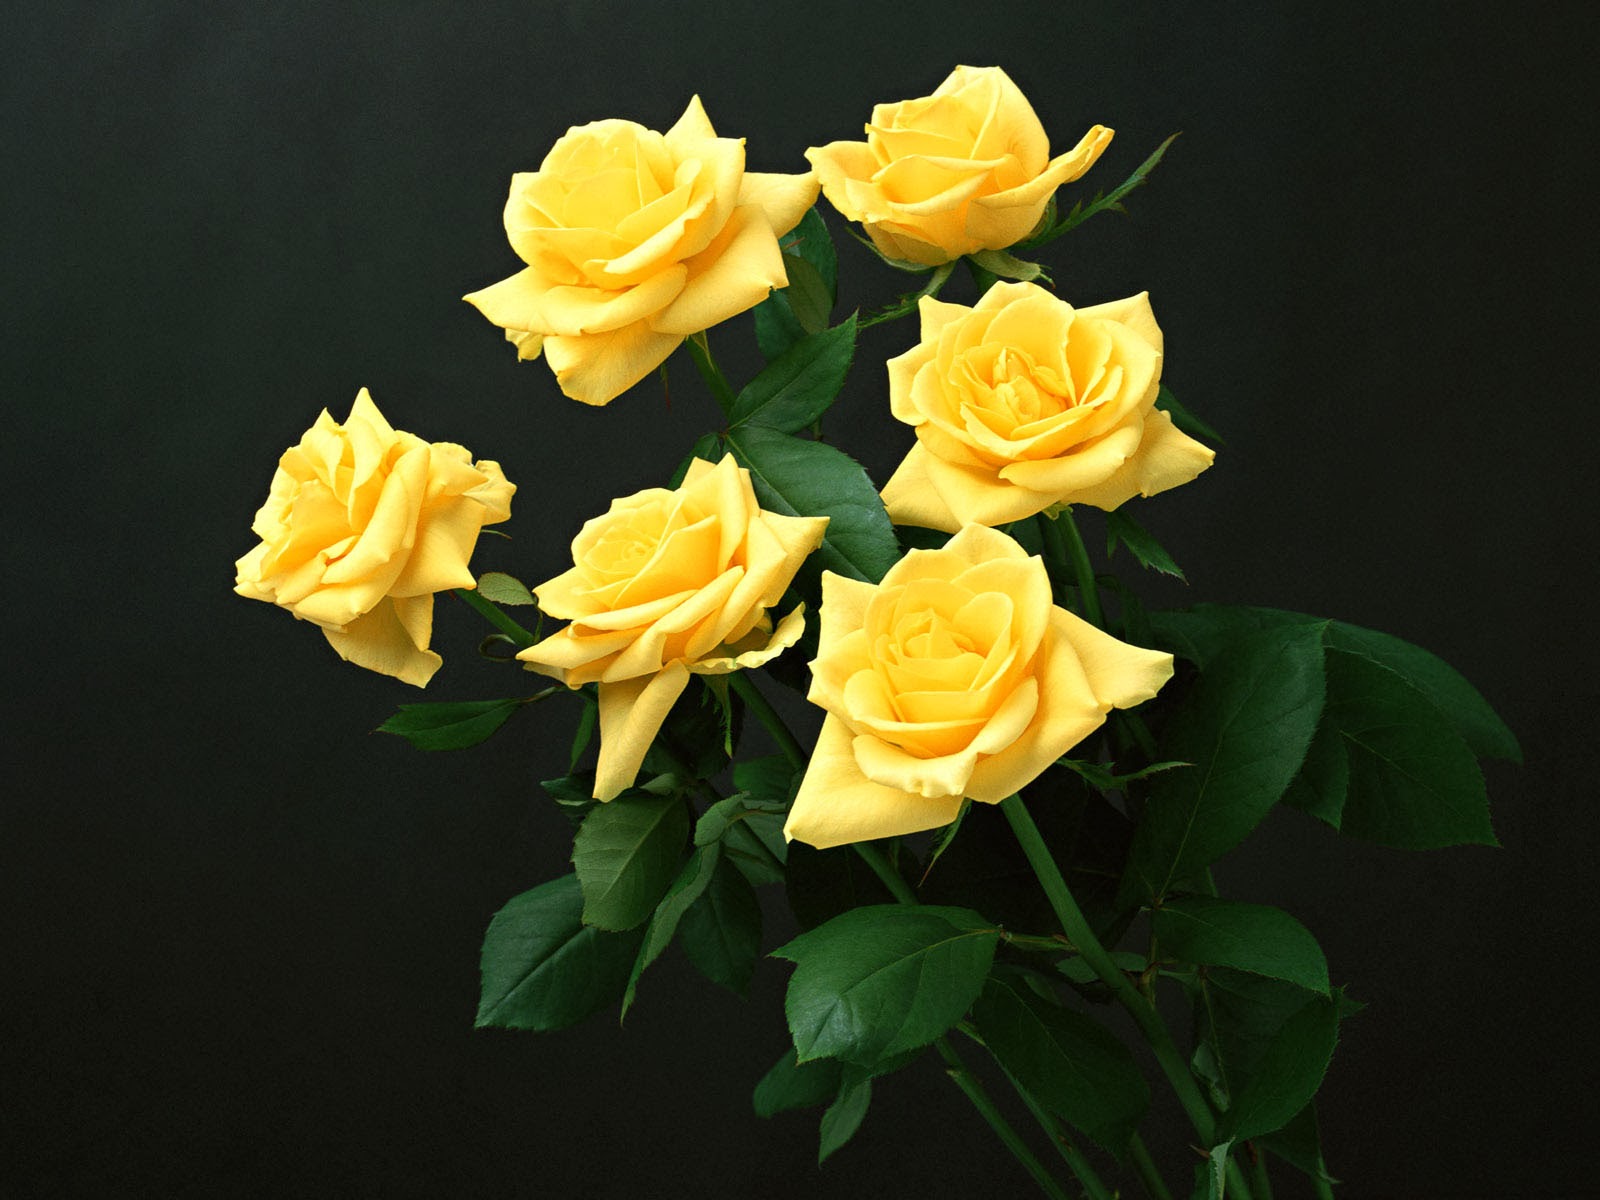 wallpapers: Yellow Rose Wallpapers